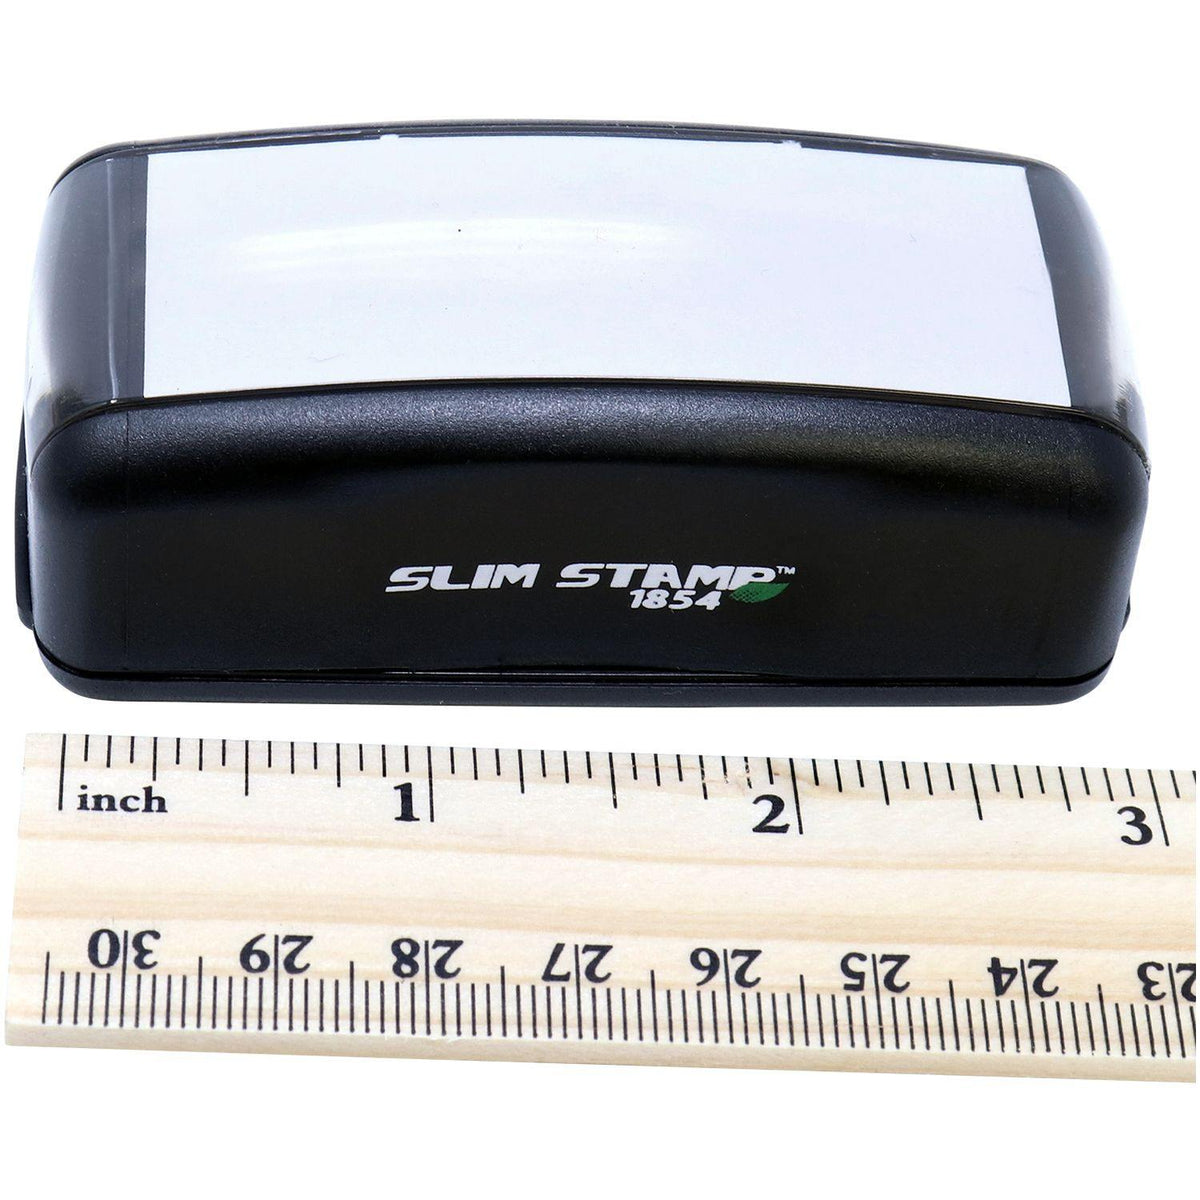 Measurement Large Pre-Inked Your Work is Out of this world Stamp with Ruler